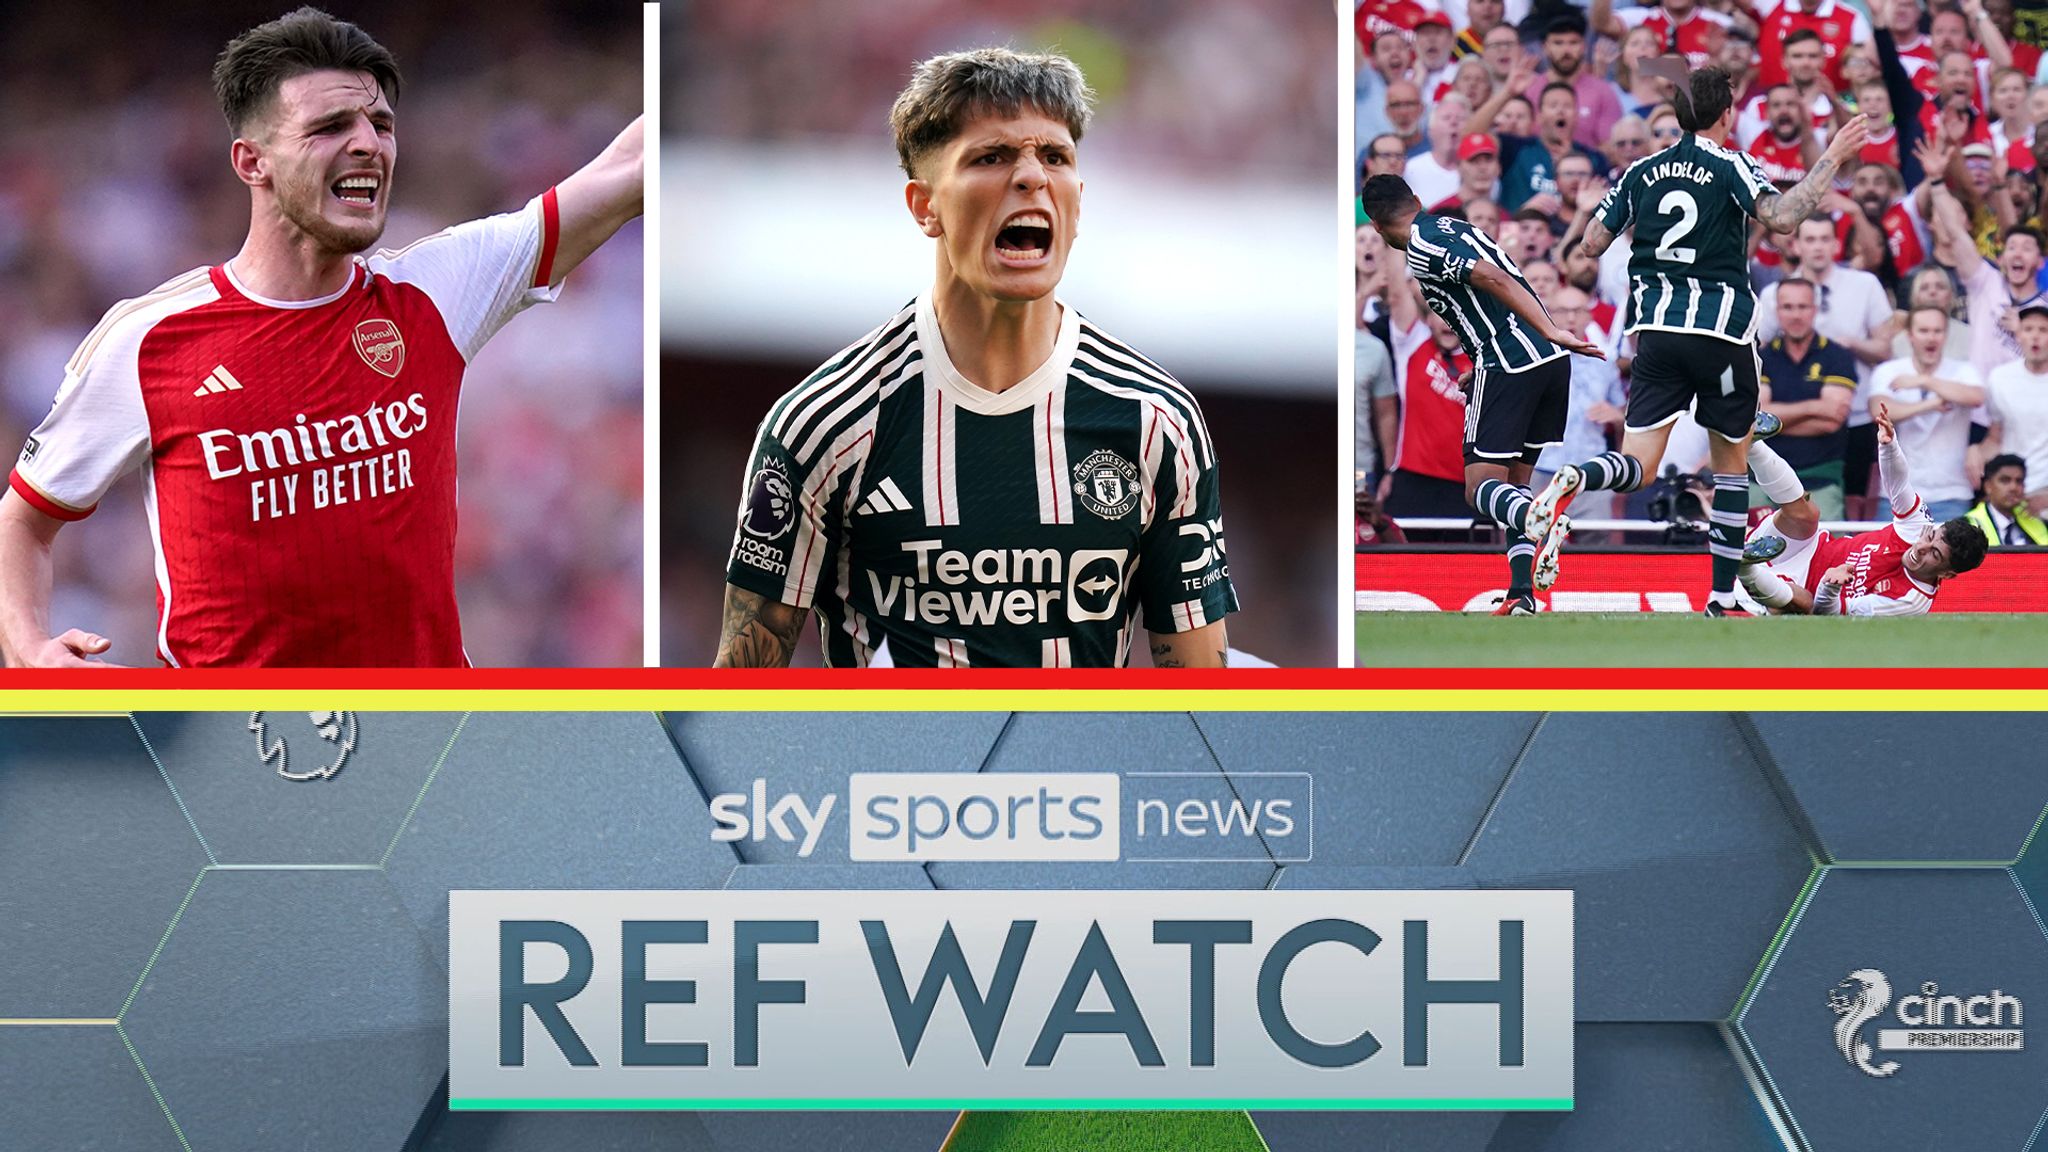 Ref Watch Arsenal 3-1 Manchester Utd The big incidents reviewed Video Watch TV Show Sky Sports